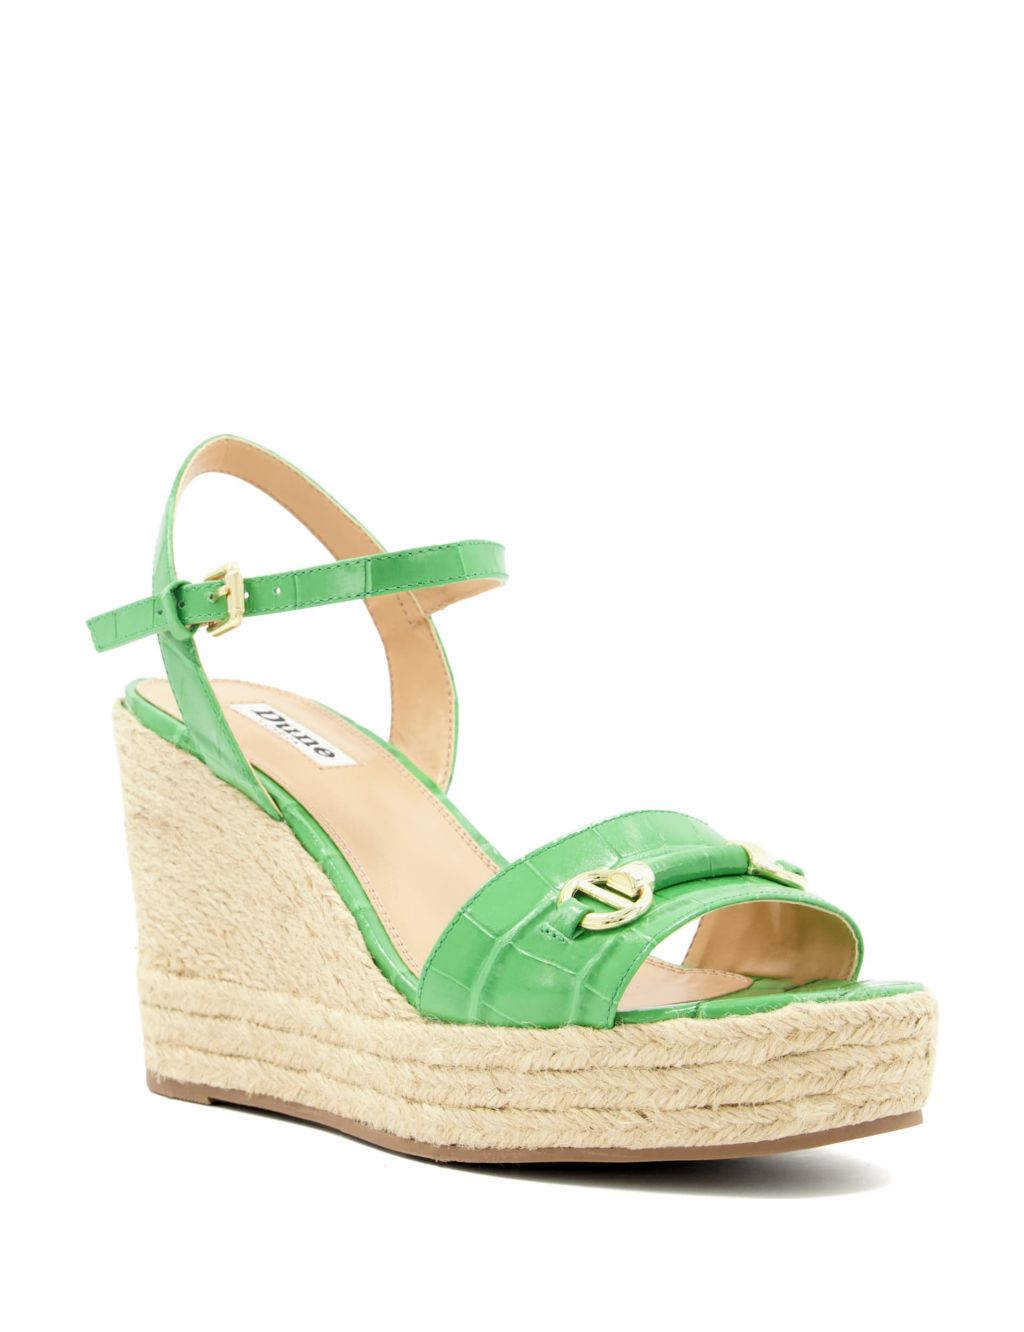 Leather Ankle Strap Wedge Sandals image 2